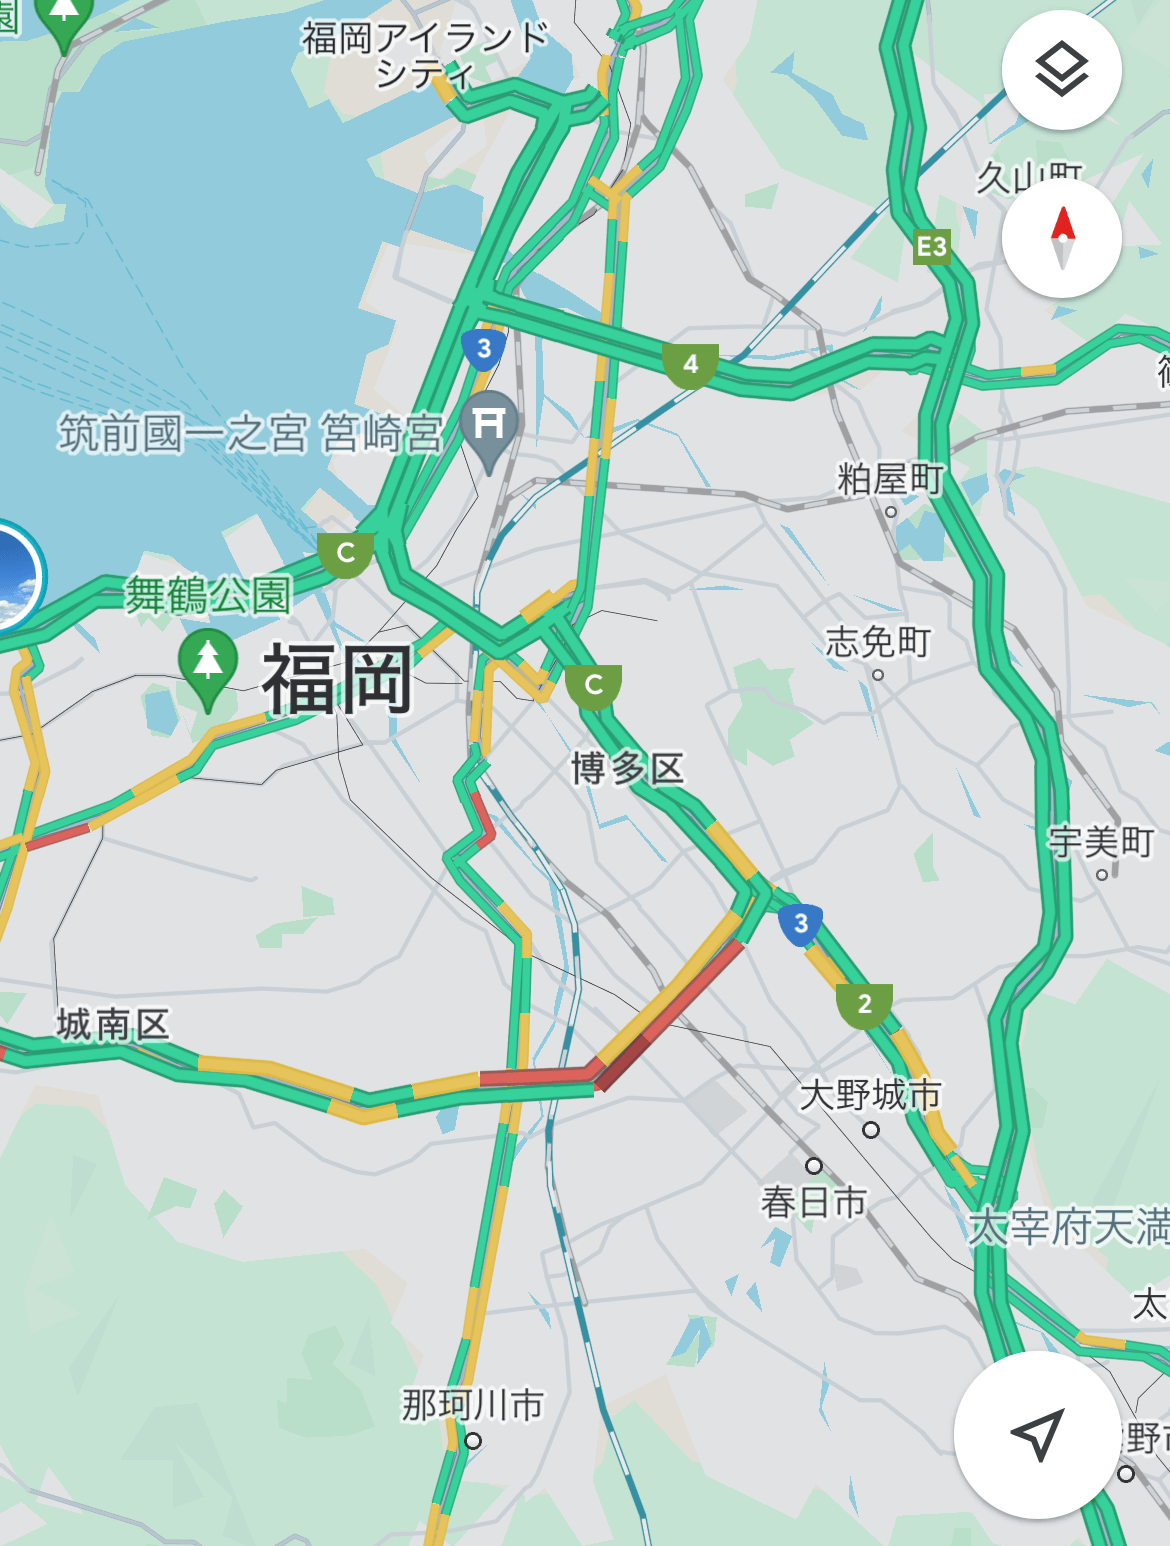 GoogleMaps newcolor 2